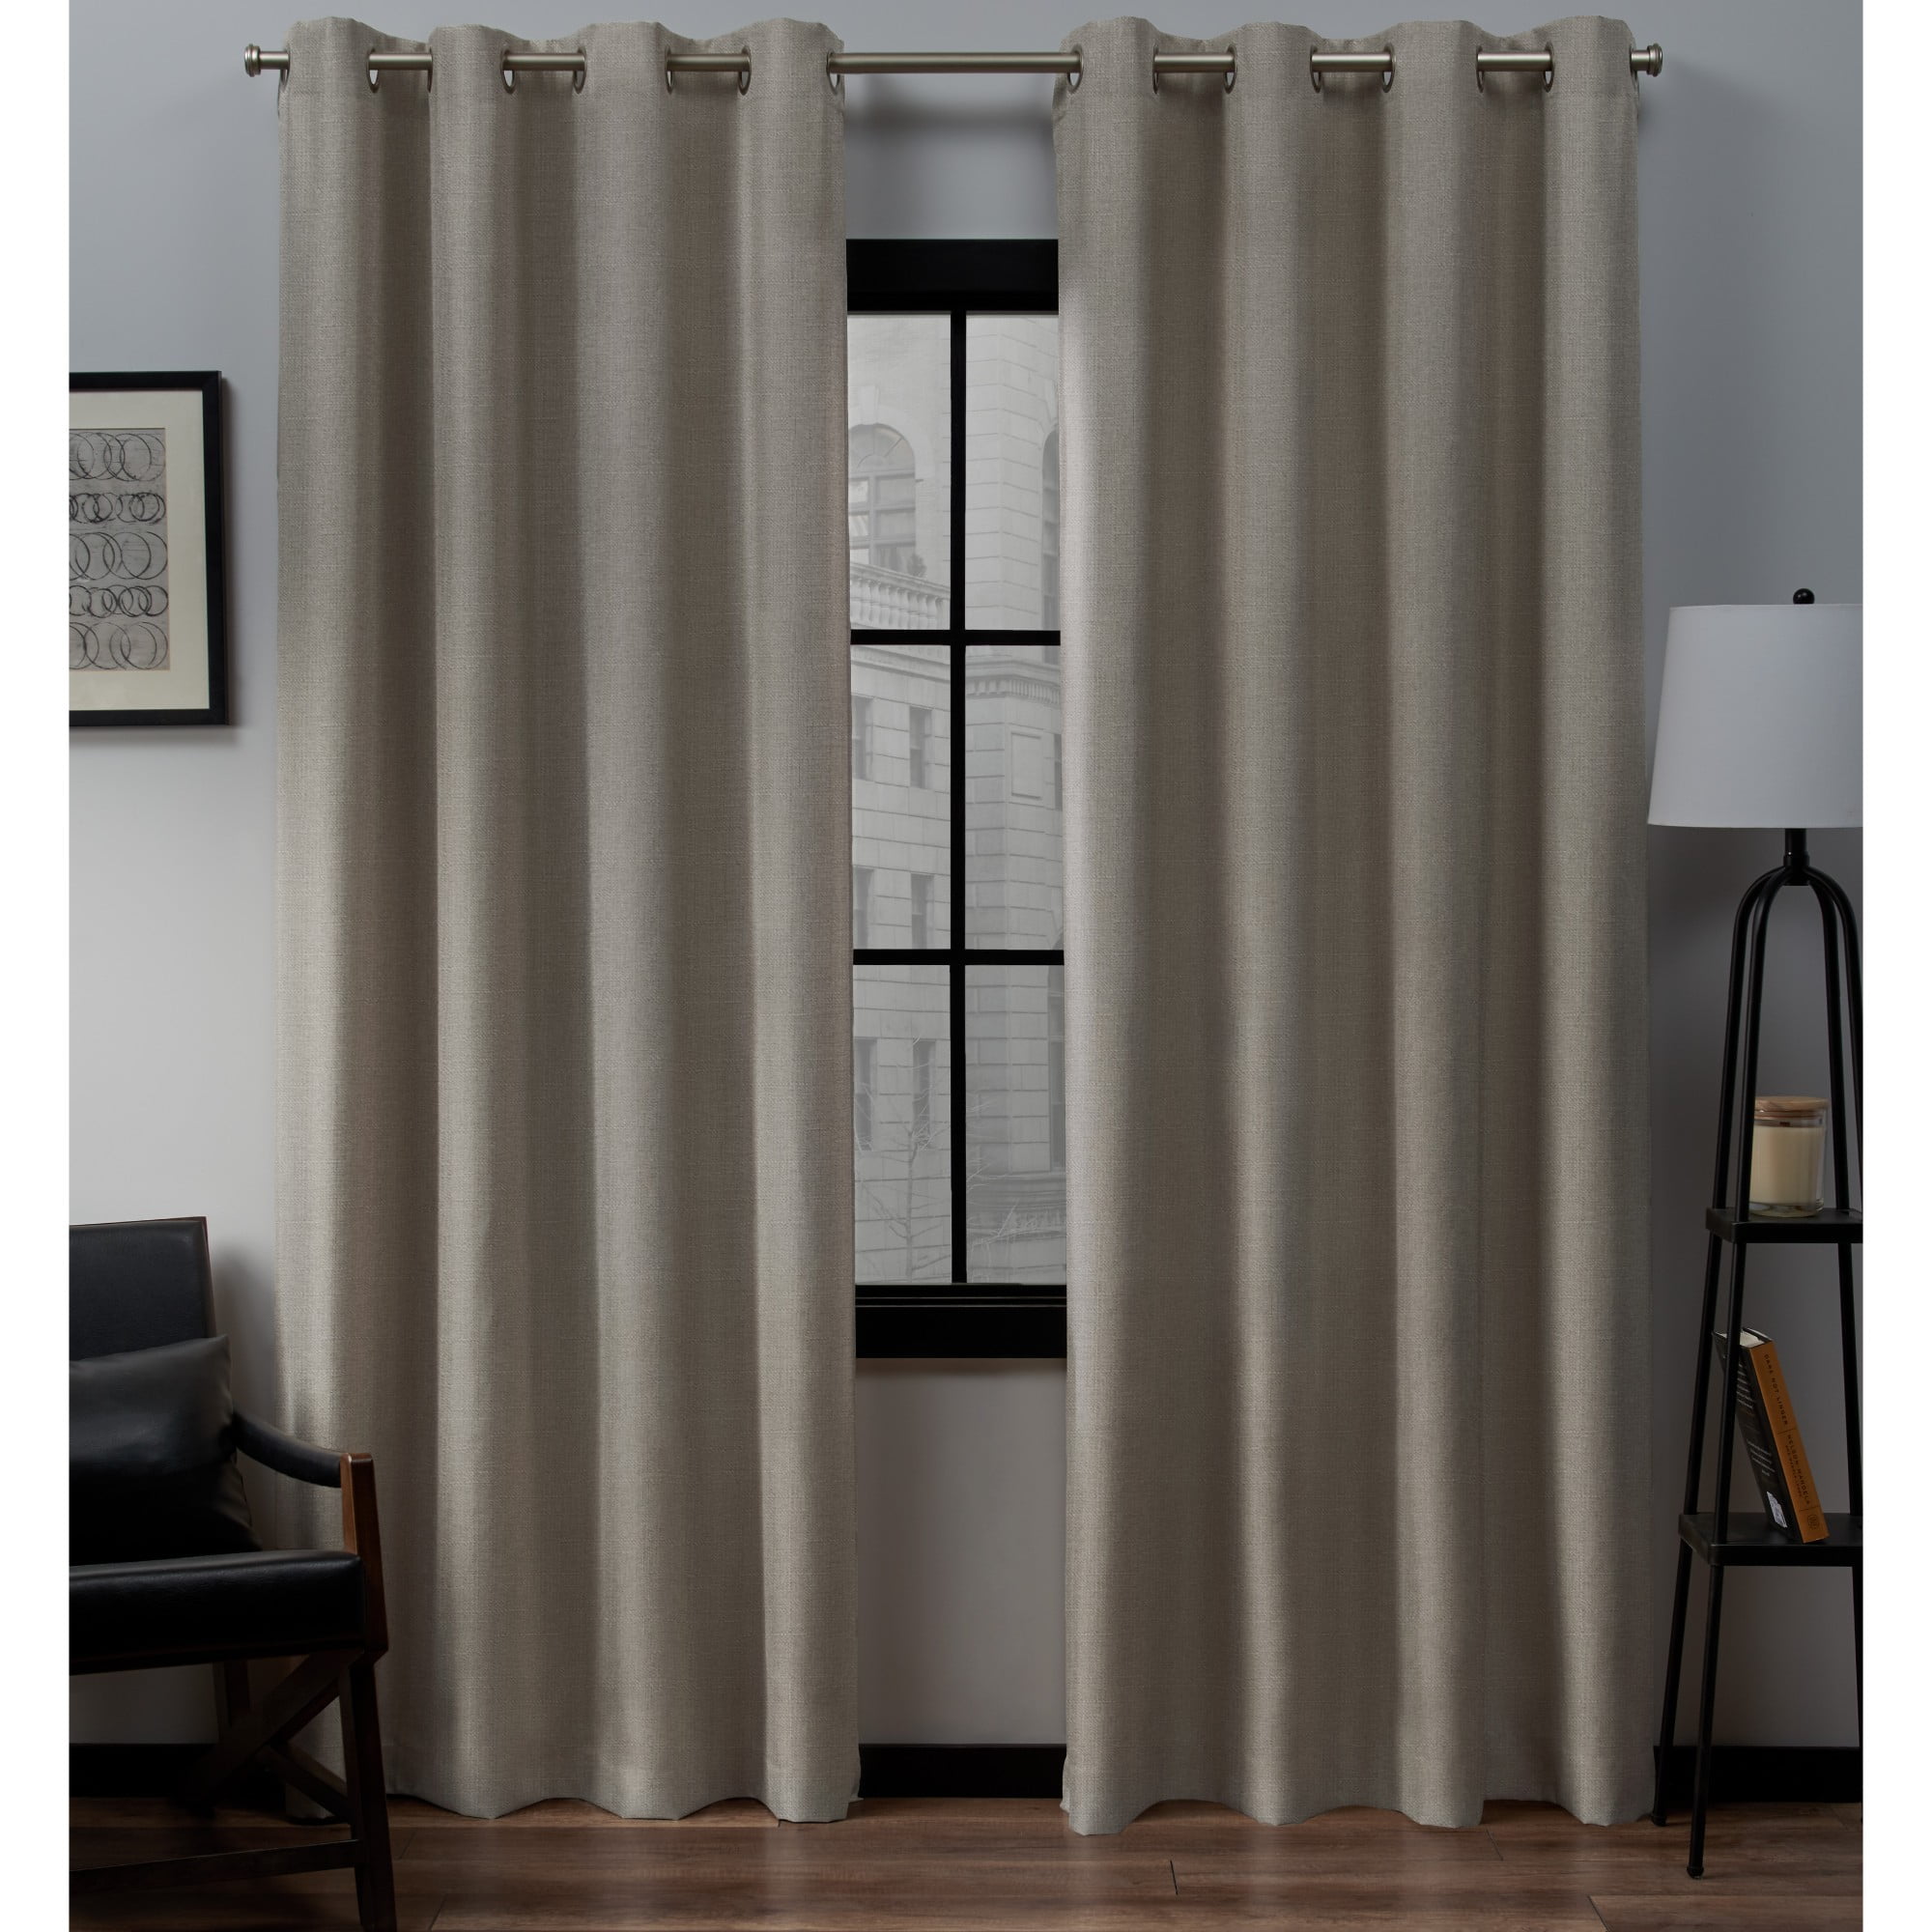 How To Hide Grommets On Curtains Exclusive Home Curtains Loha Linen Grommet Top Curtain Panel Pair, 54x108,  Natural - Walmart.com